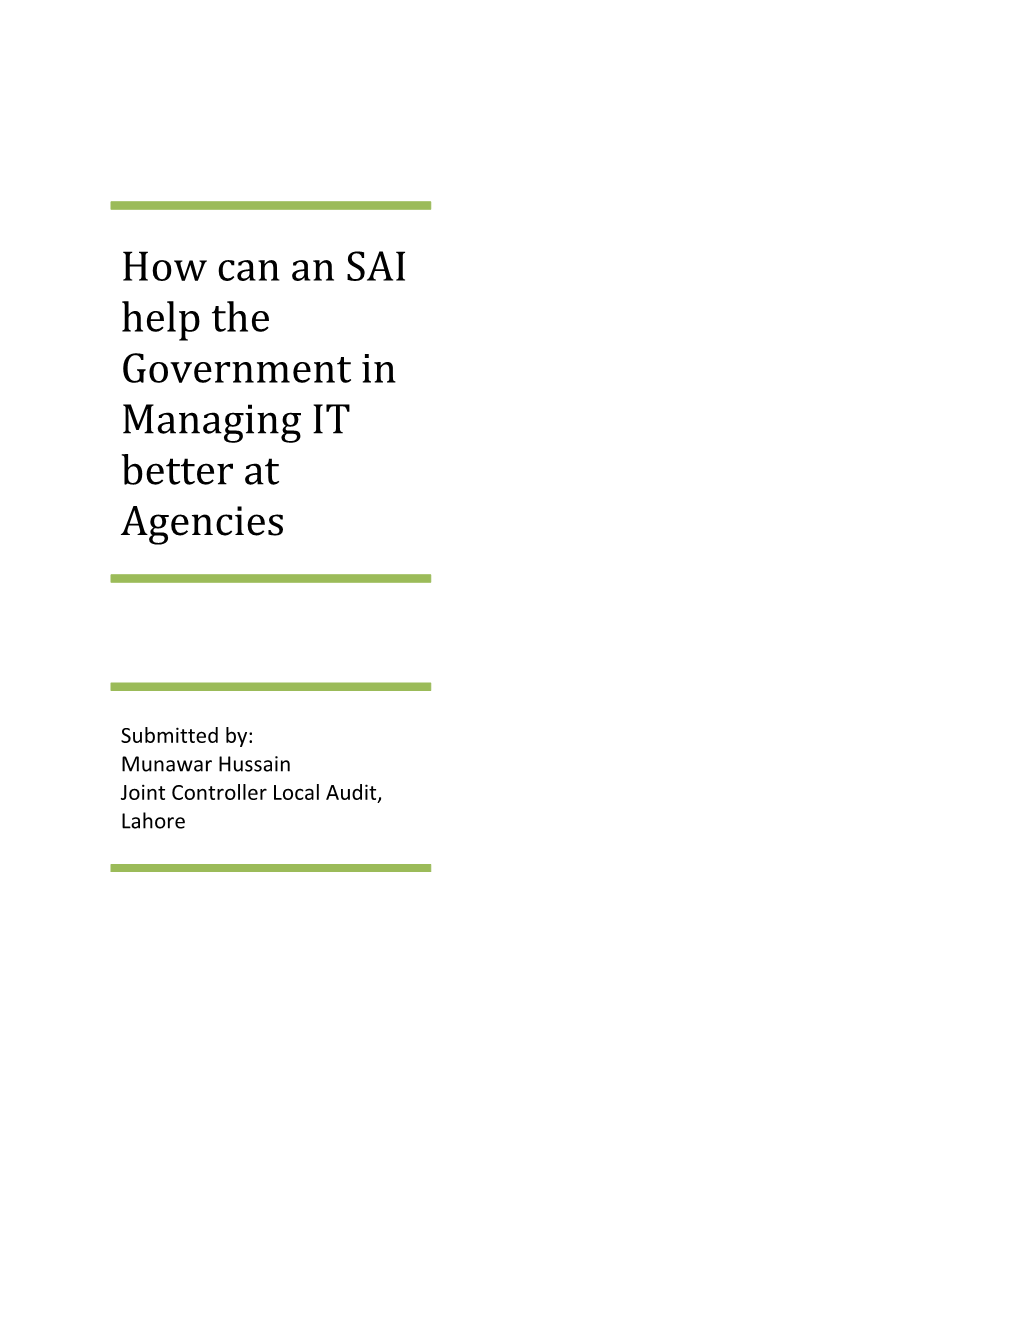 How Can an SAI Help the Government in Managing IT Better at Agencies